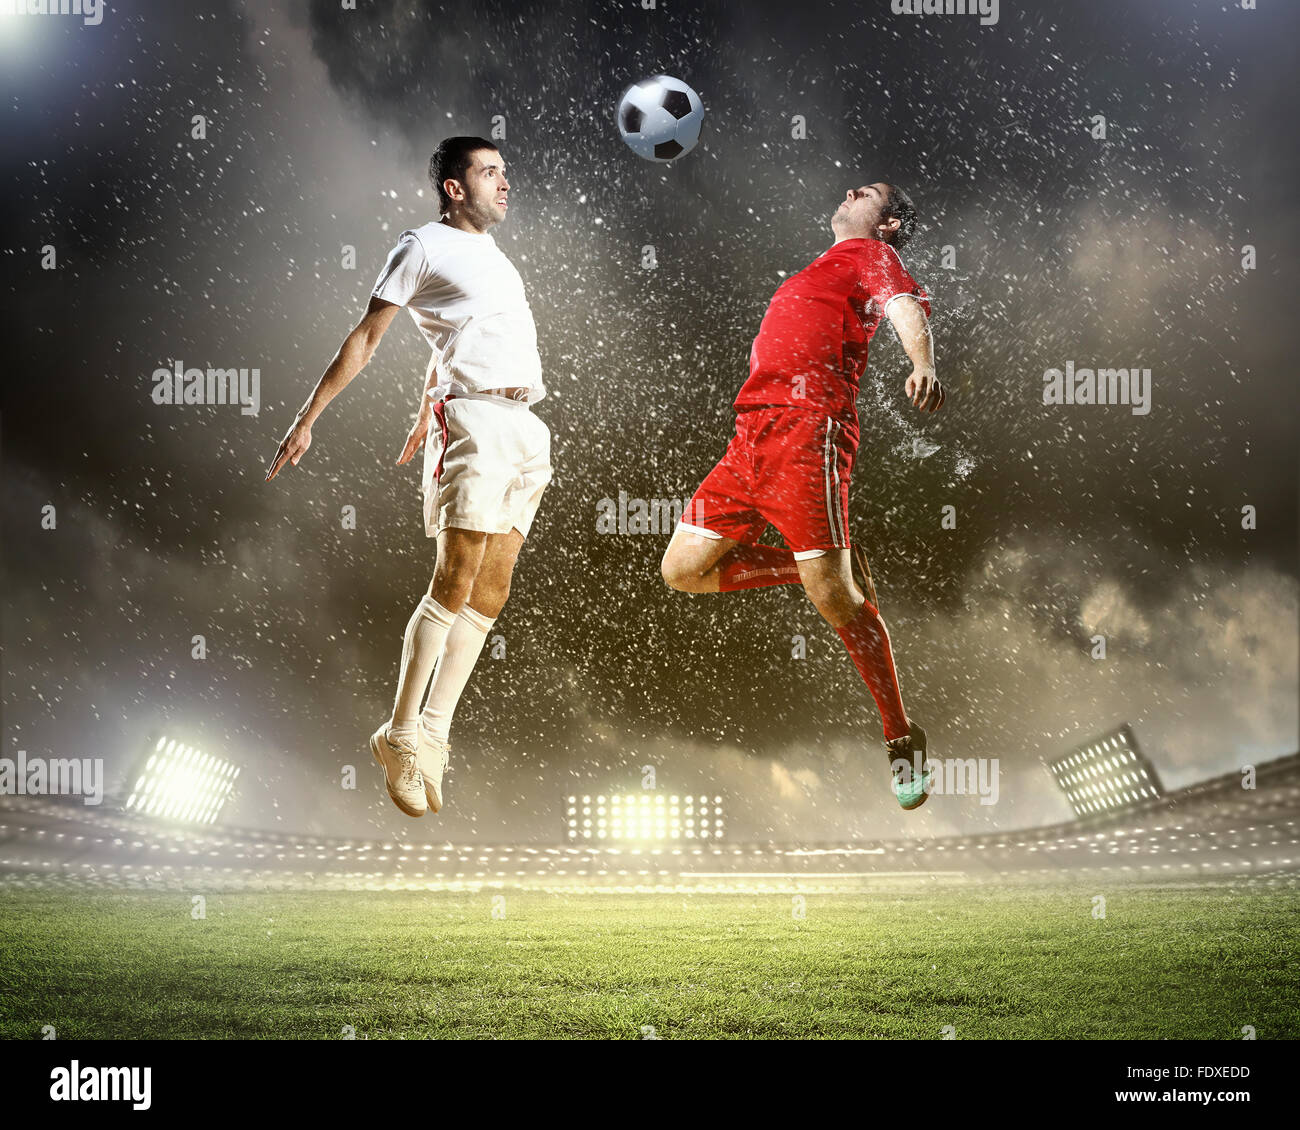 Image Of Two Football Players At Stadium Stock Photo, Picture and Royalty  Free Image. Image 19976658.